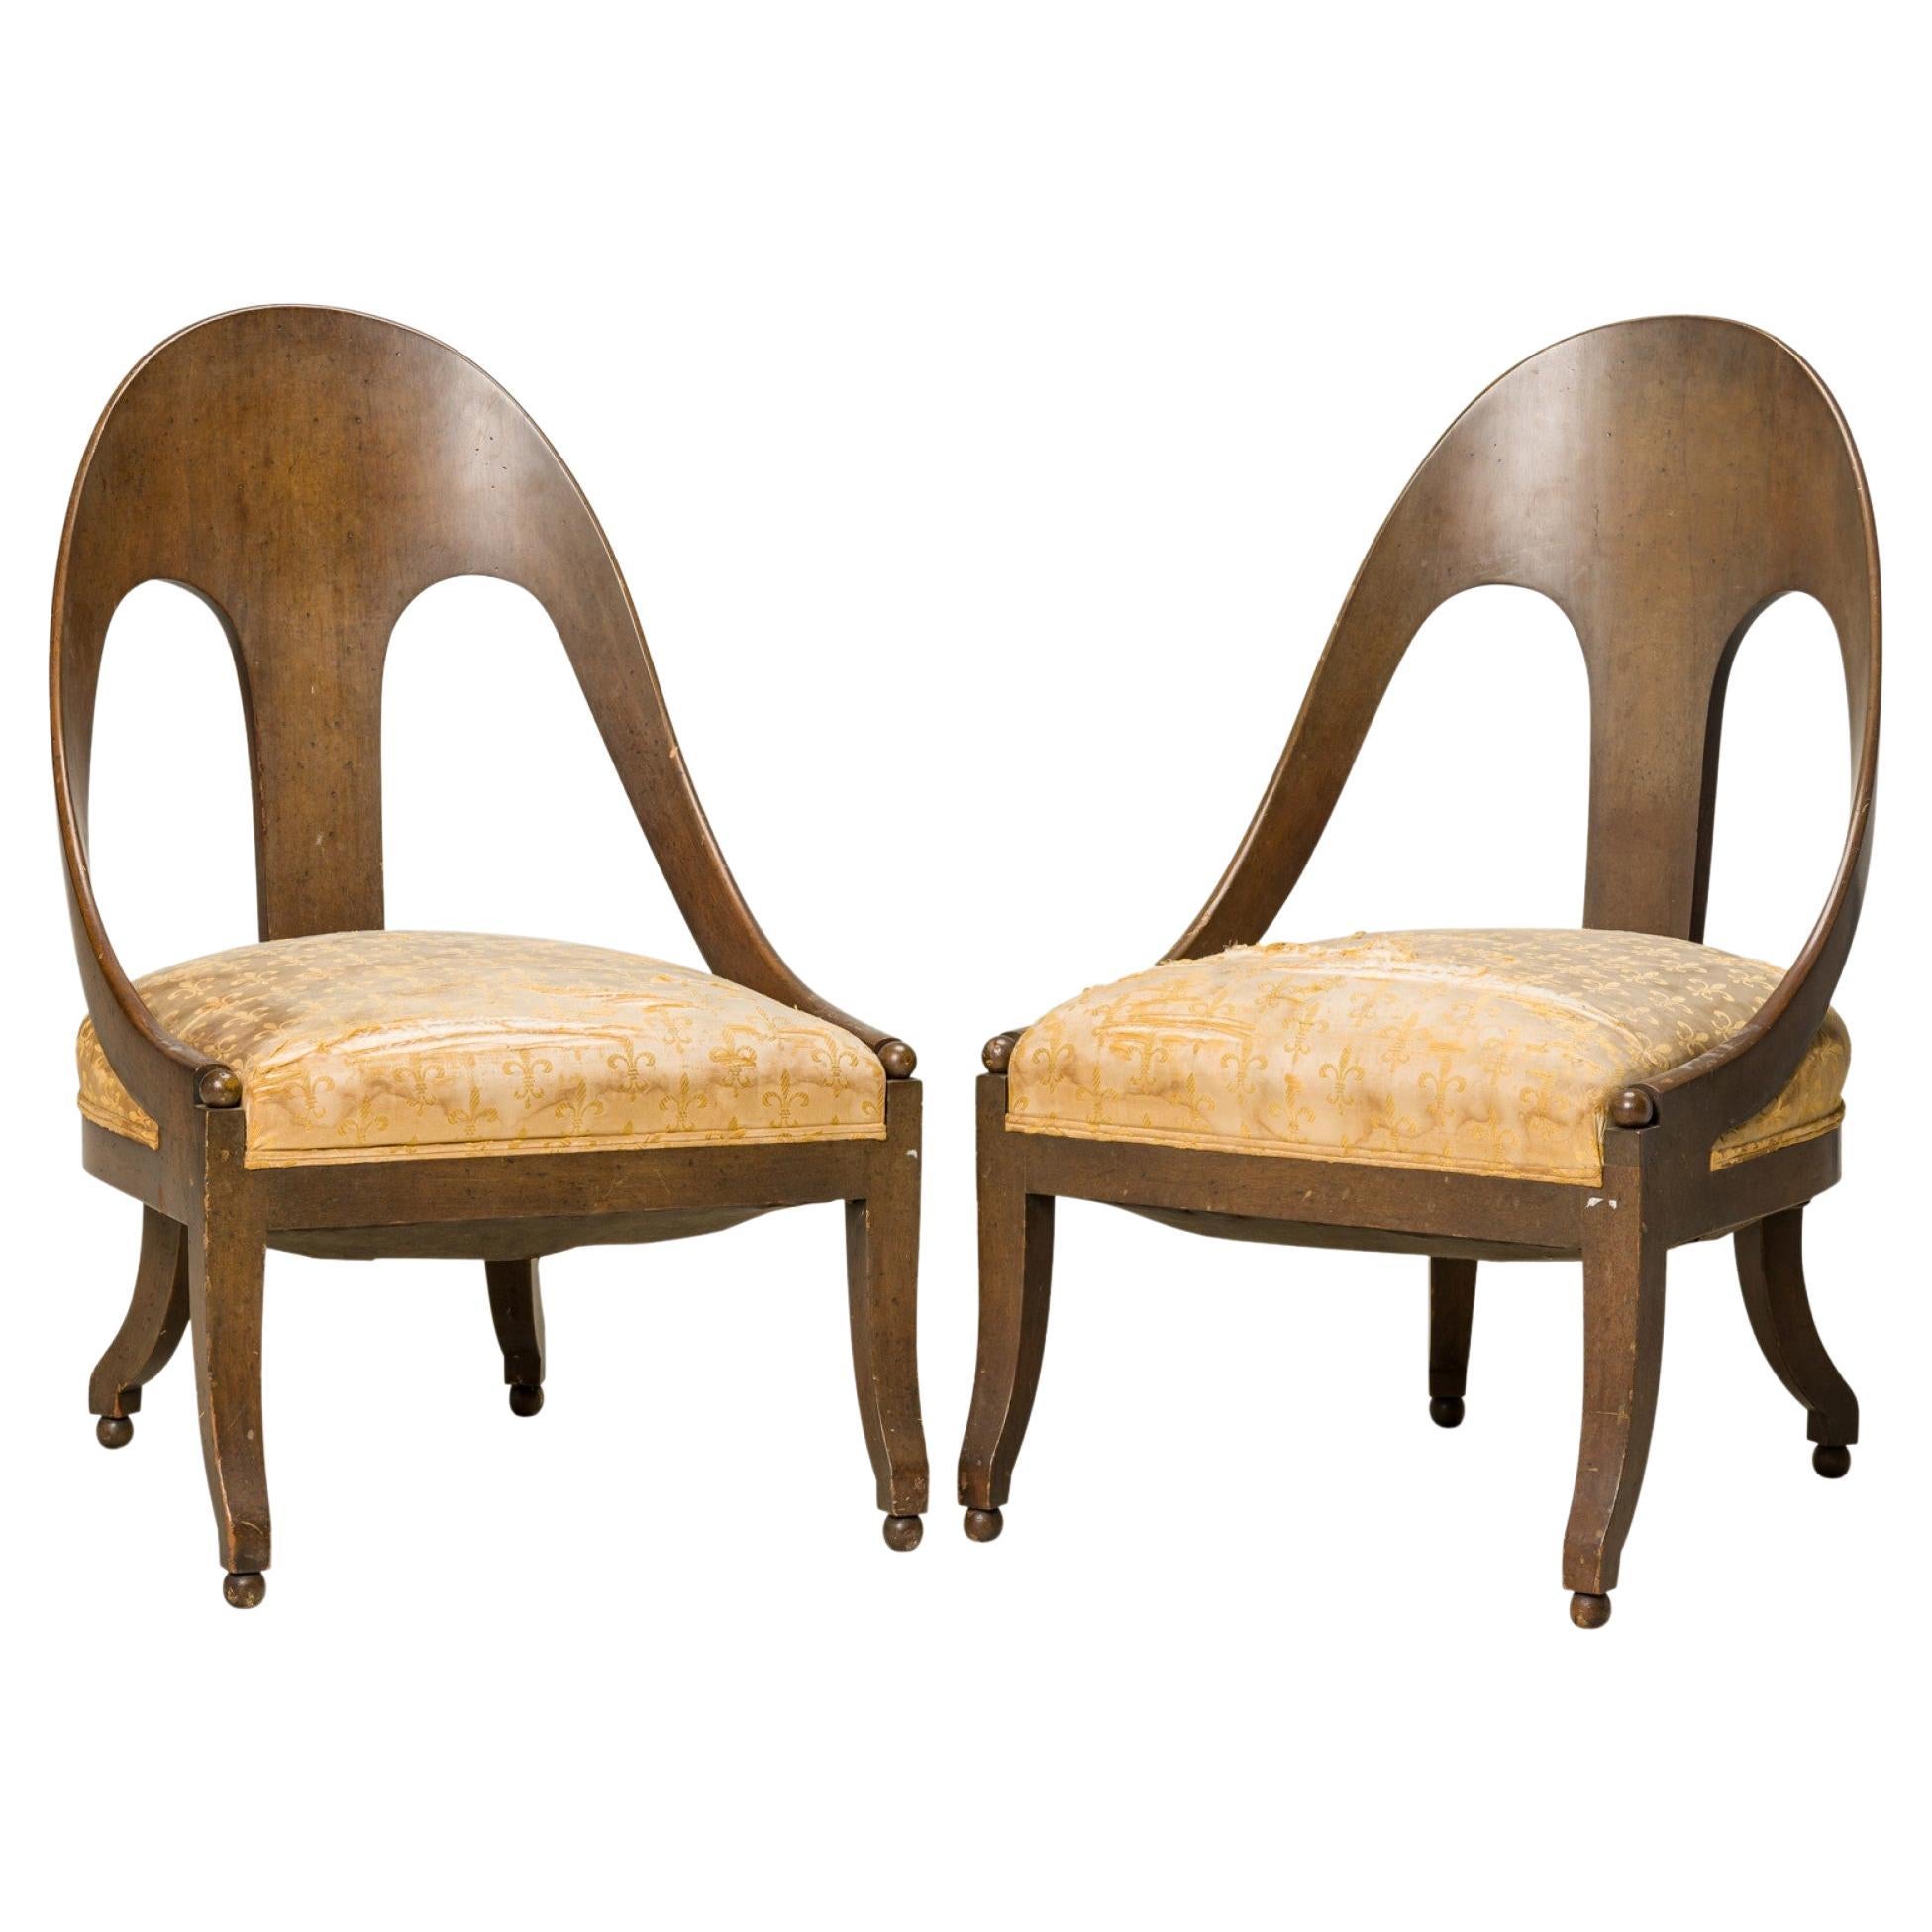 Pair of Walnut and Fleur De Lis Print Beige Upholstery Spoon Back Side Chairs